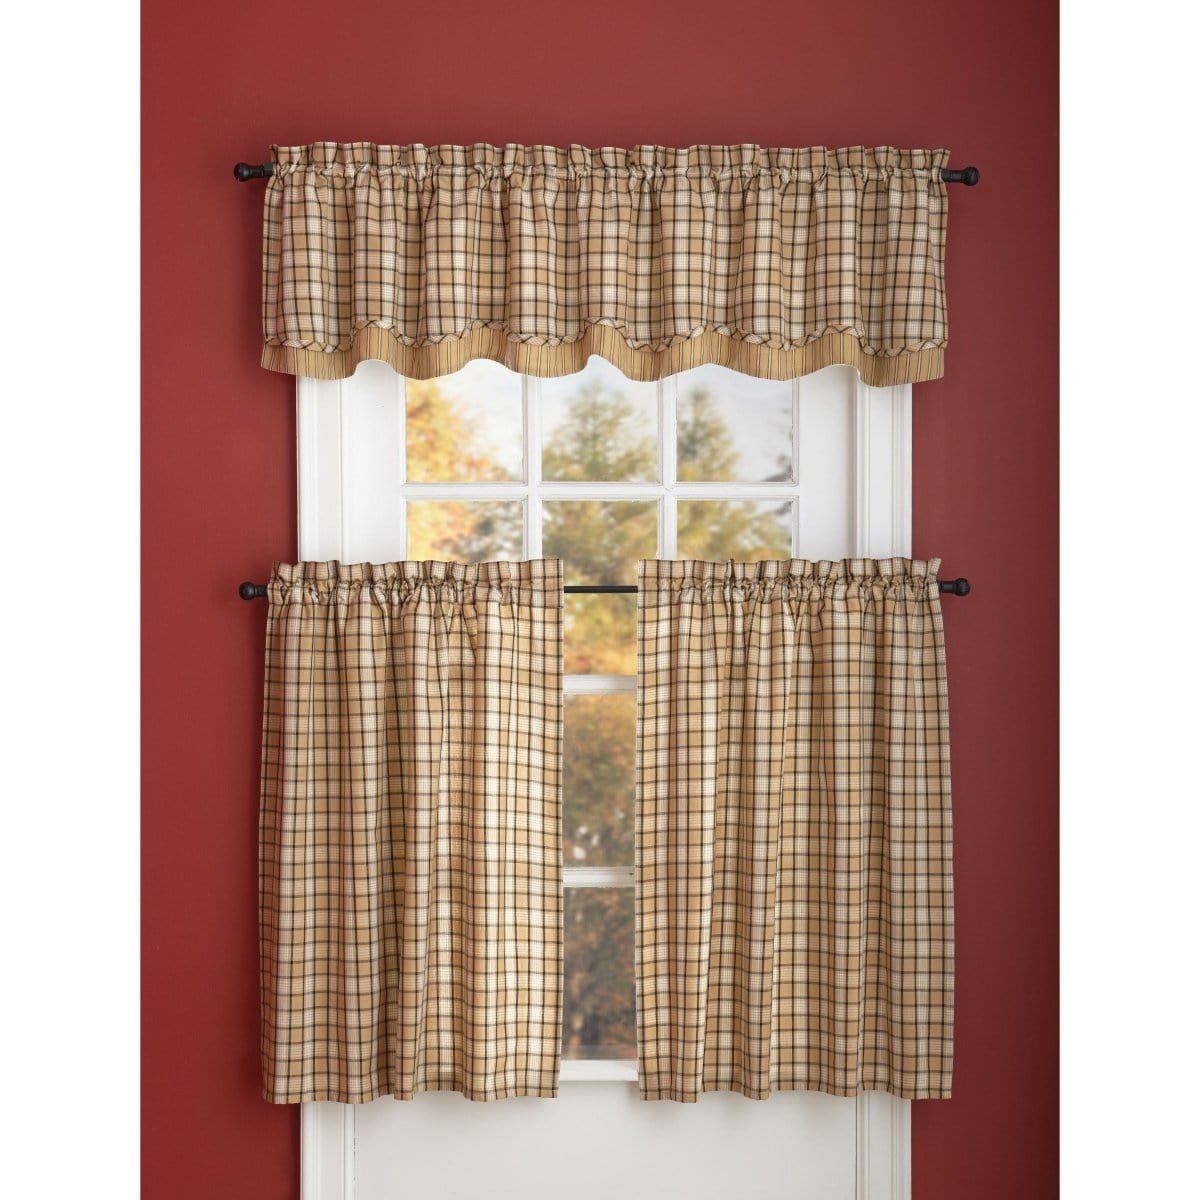 Peppercorn Layered Valance Lined-Park Designs-The Village Merchant